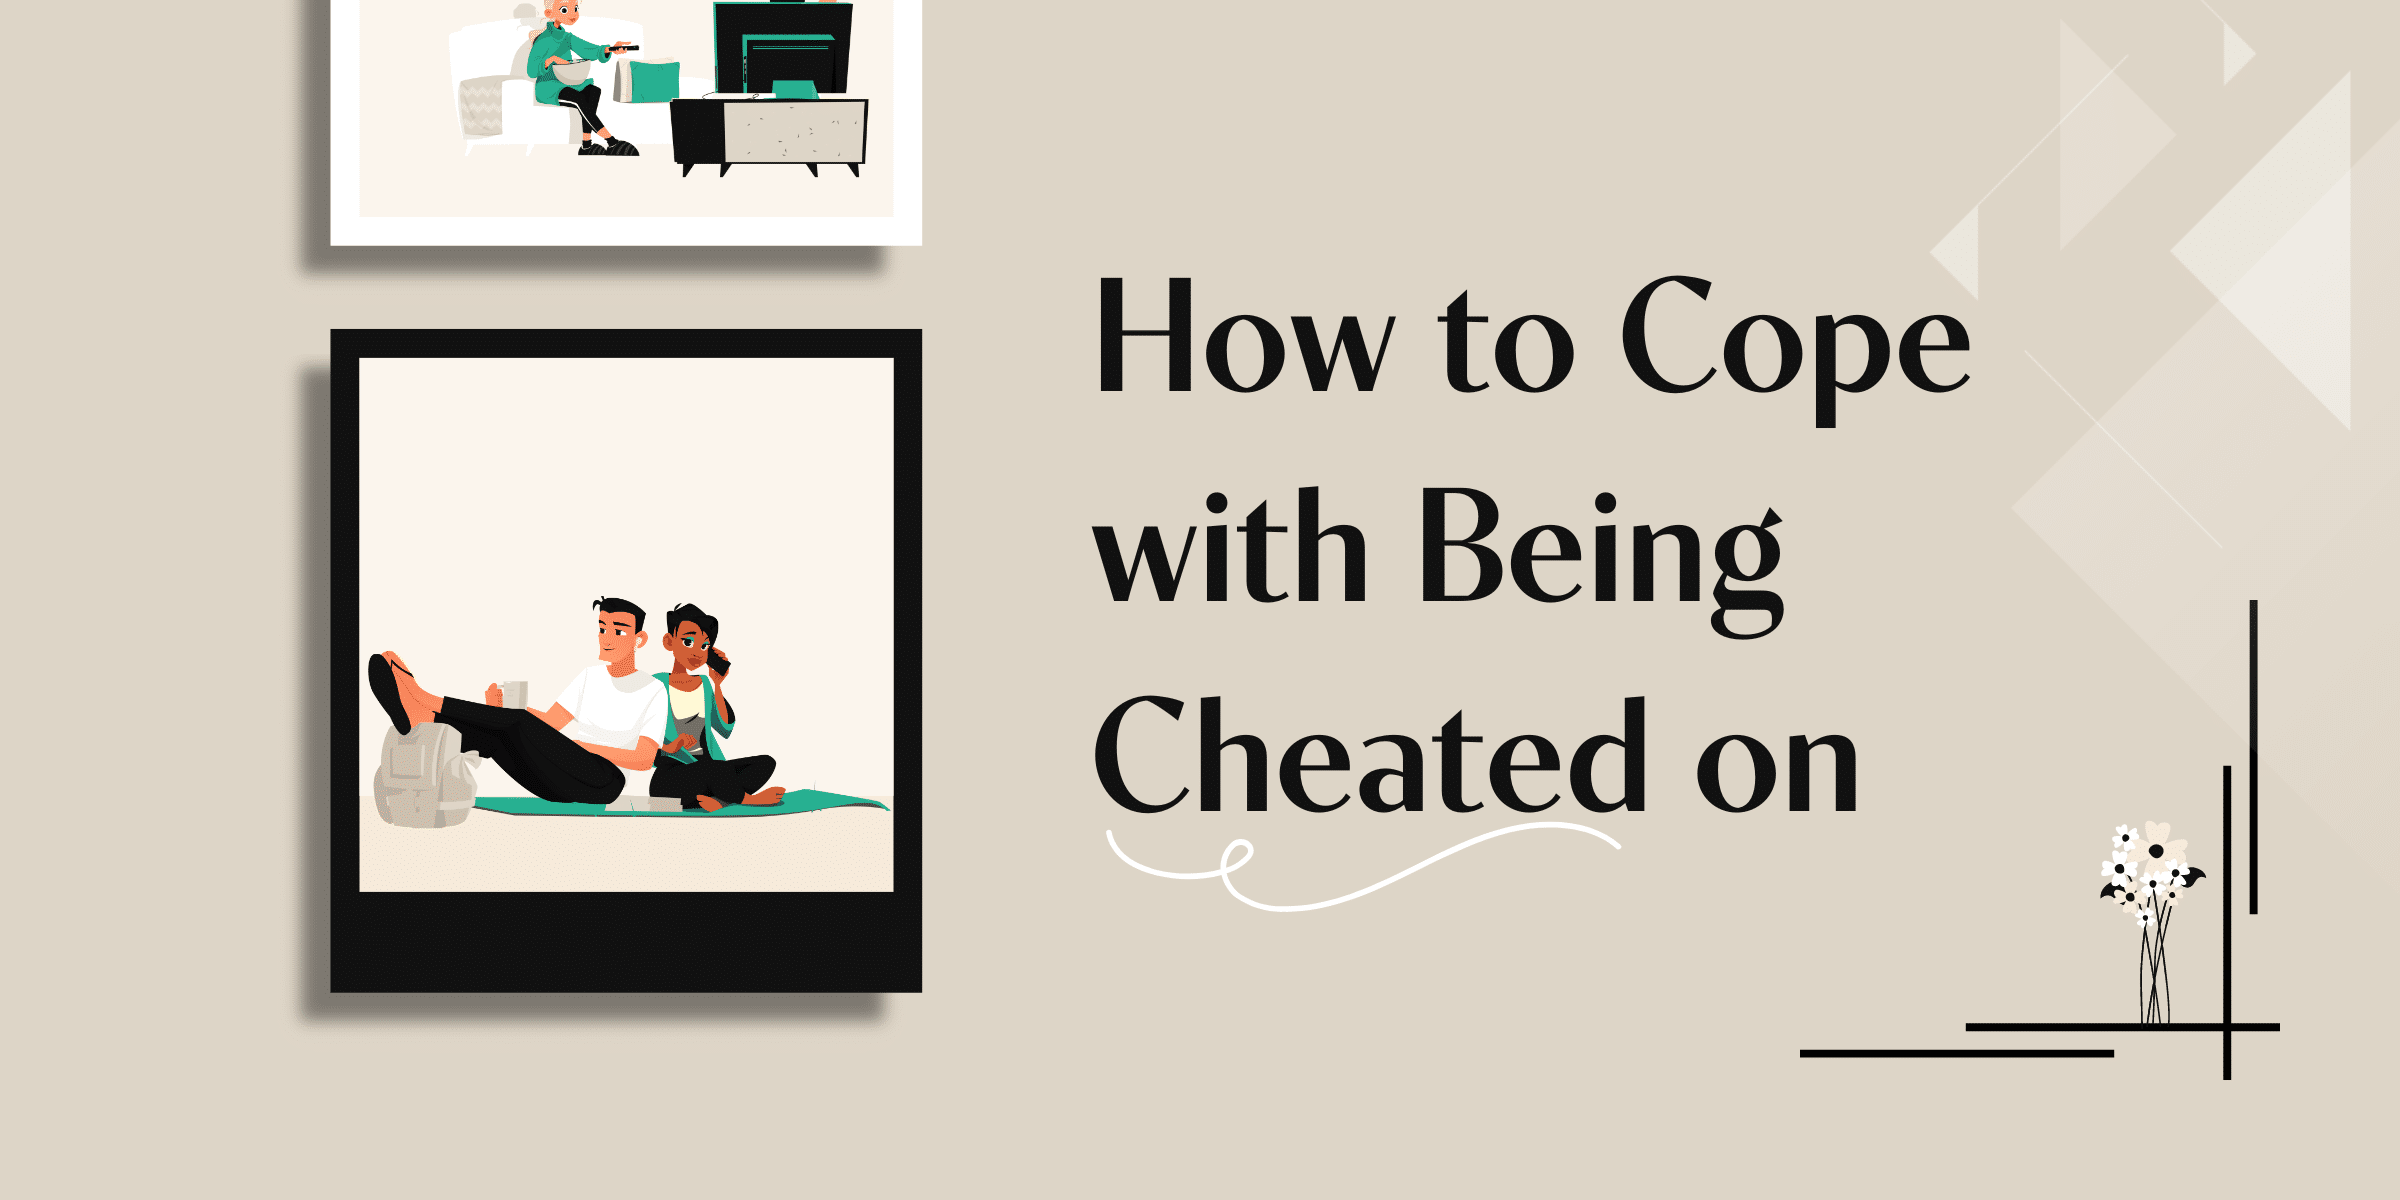 Trust after infidelity is possible. Learn how with this helpful, empathetic article about how to heal after being cheated on.